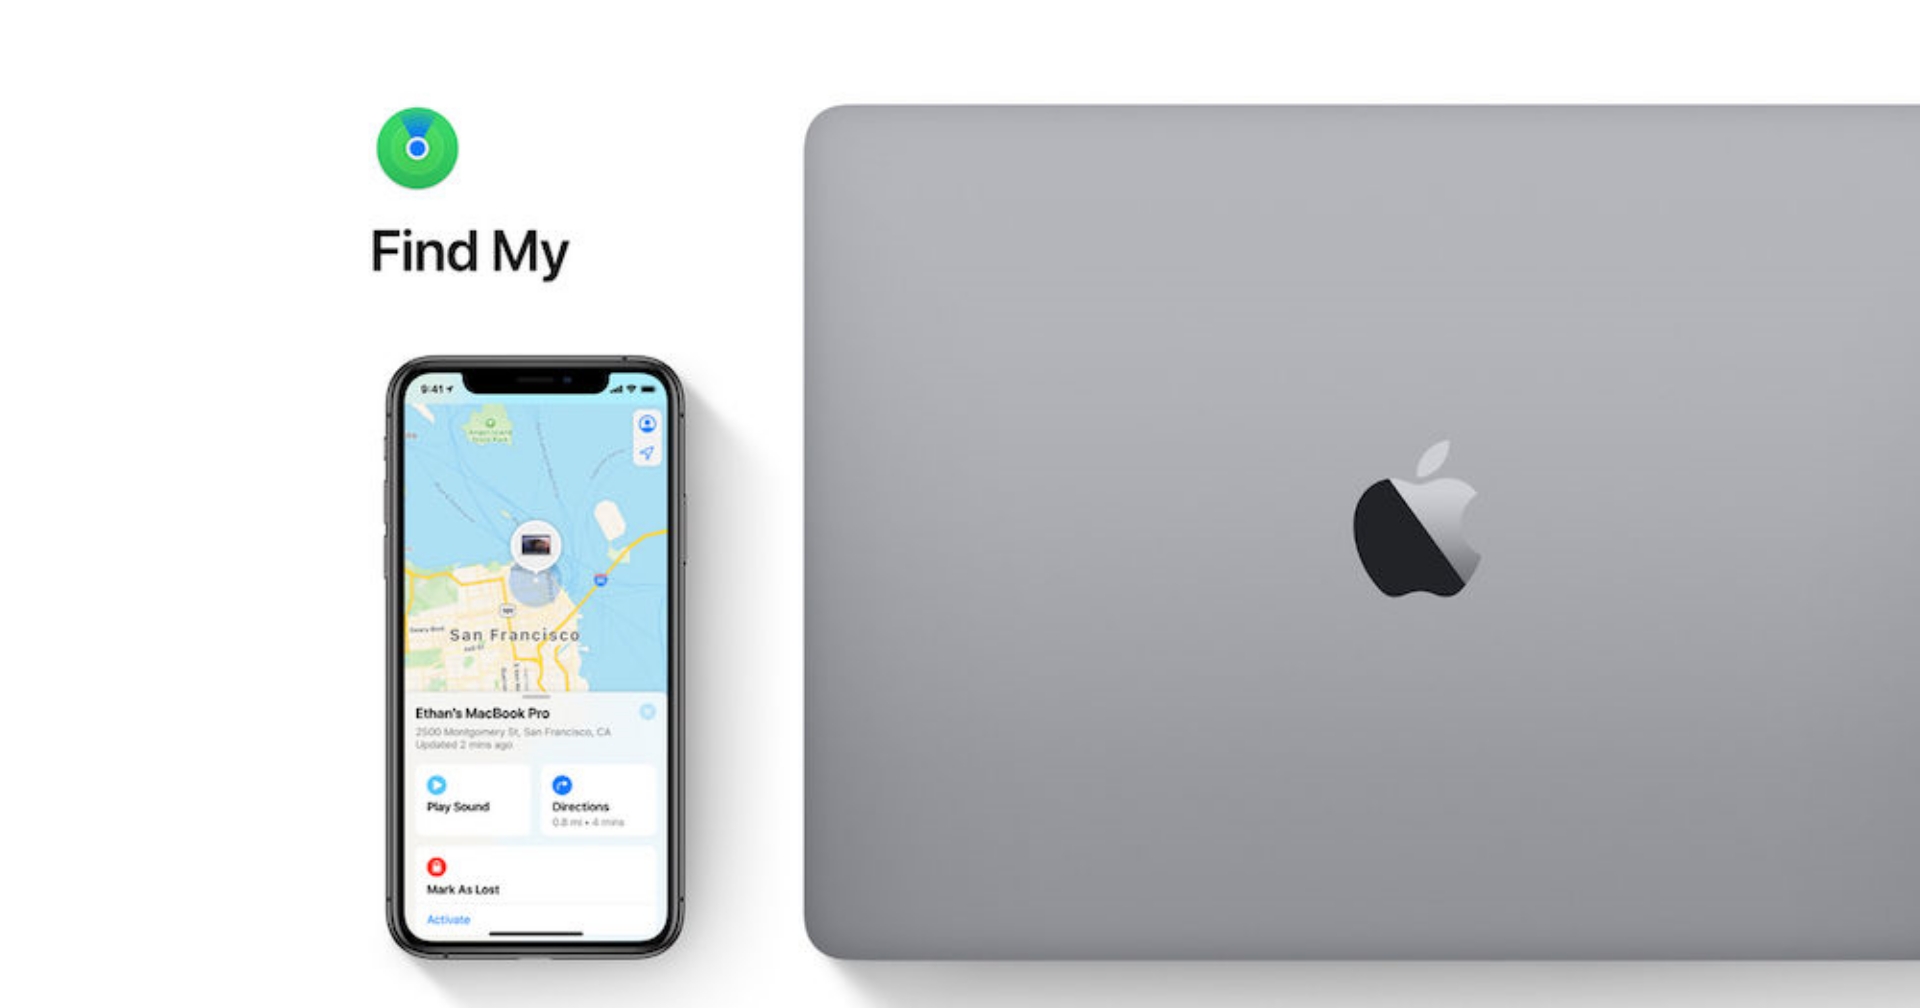 Apple tracker will allow you to locate lost or stolen objects